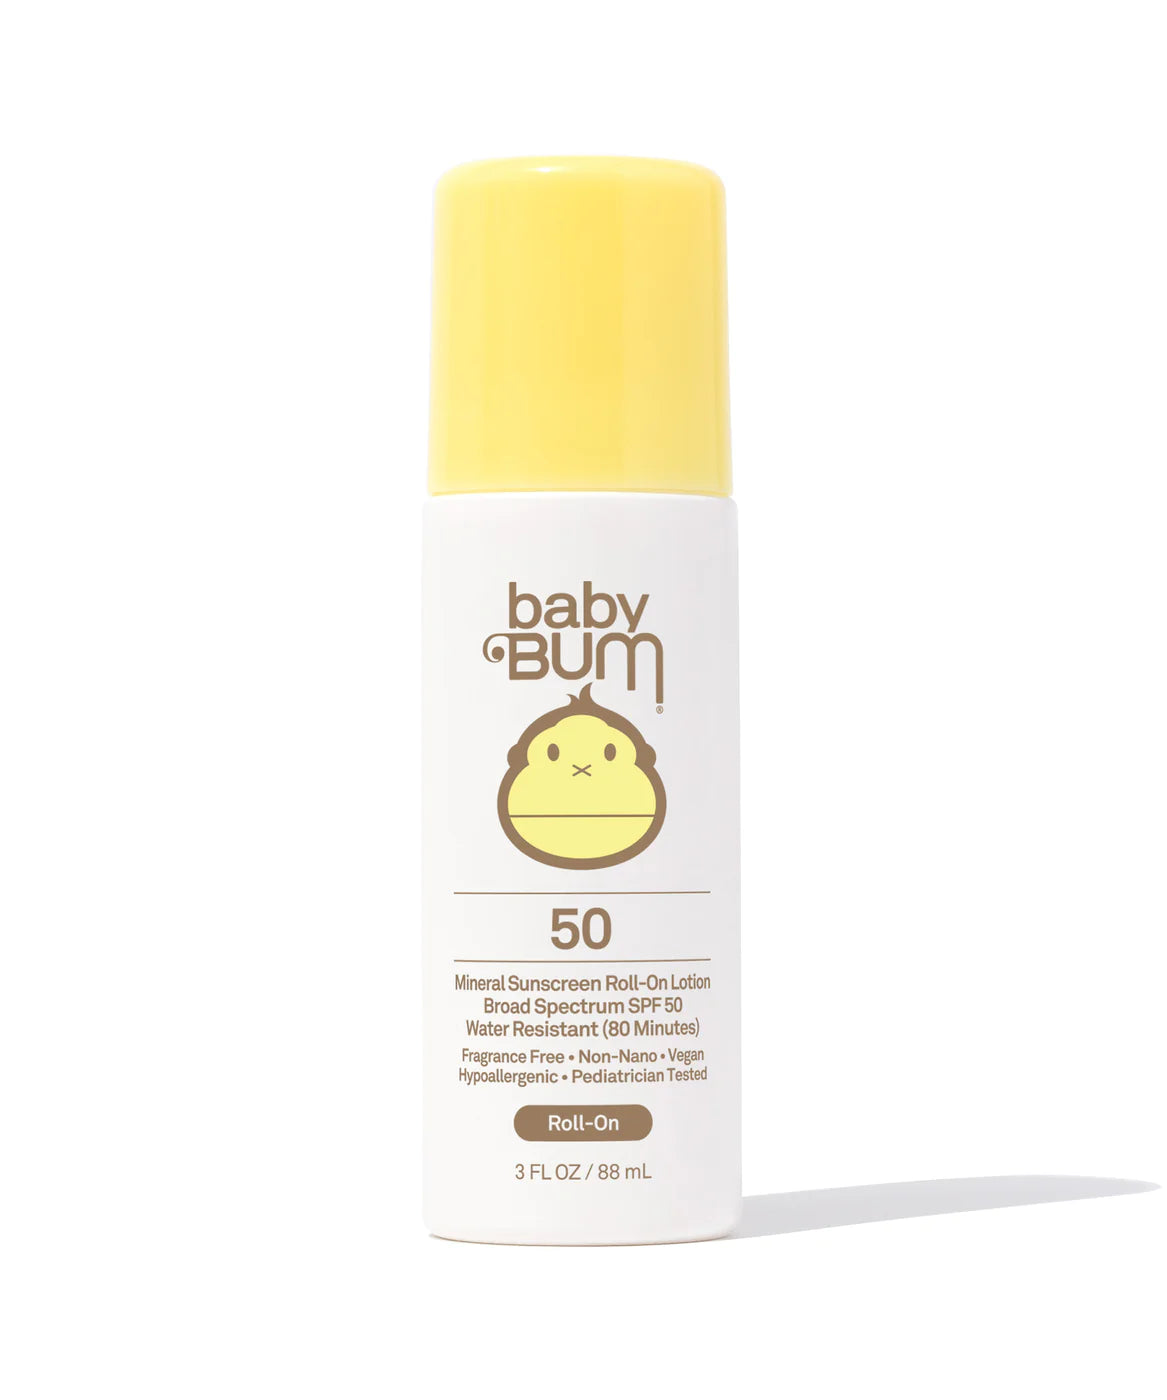 Baby Bum Mineral SPF 50 Sunscreen Roll-On Lotion